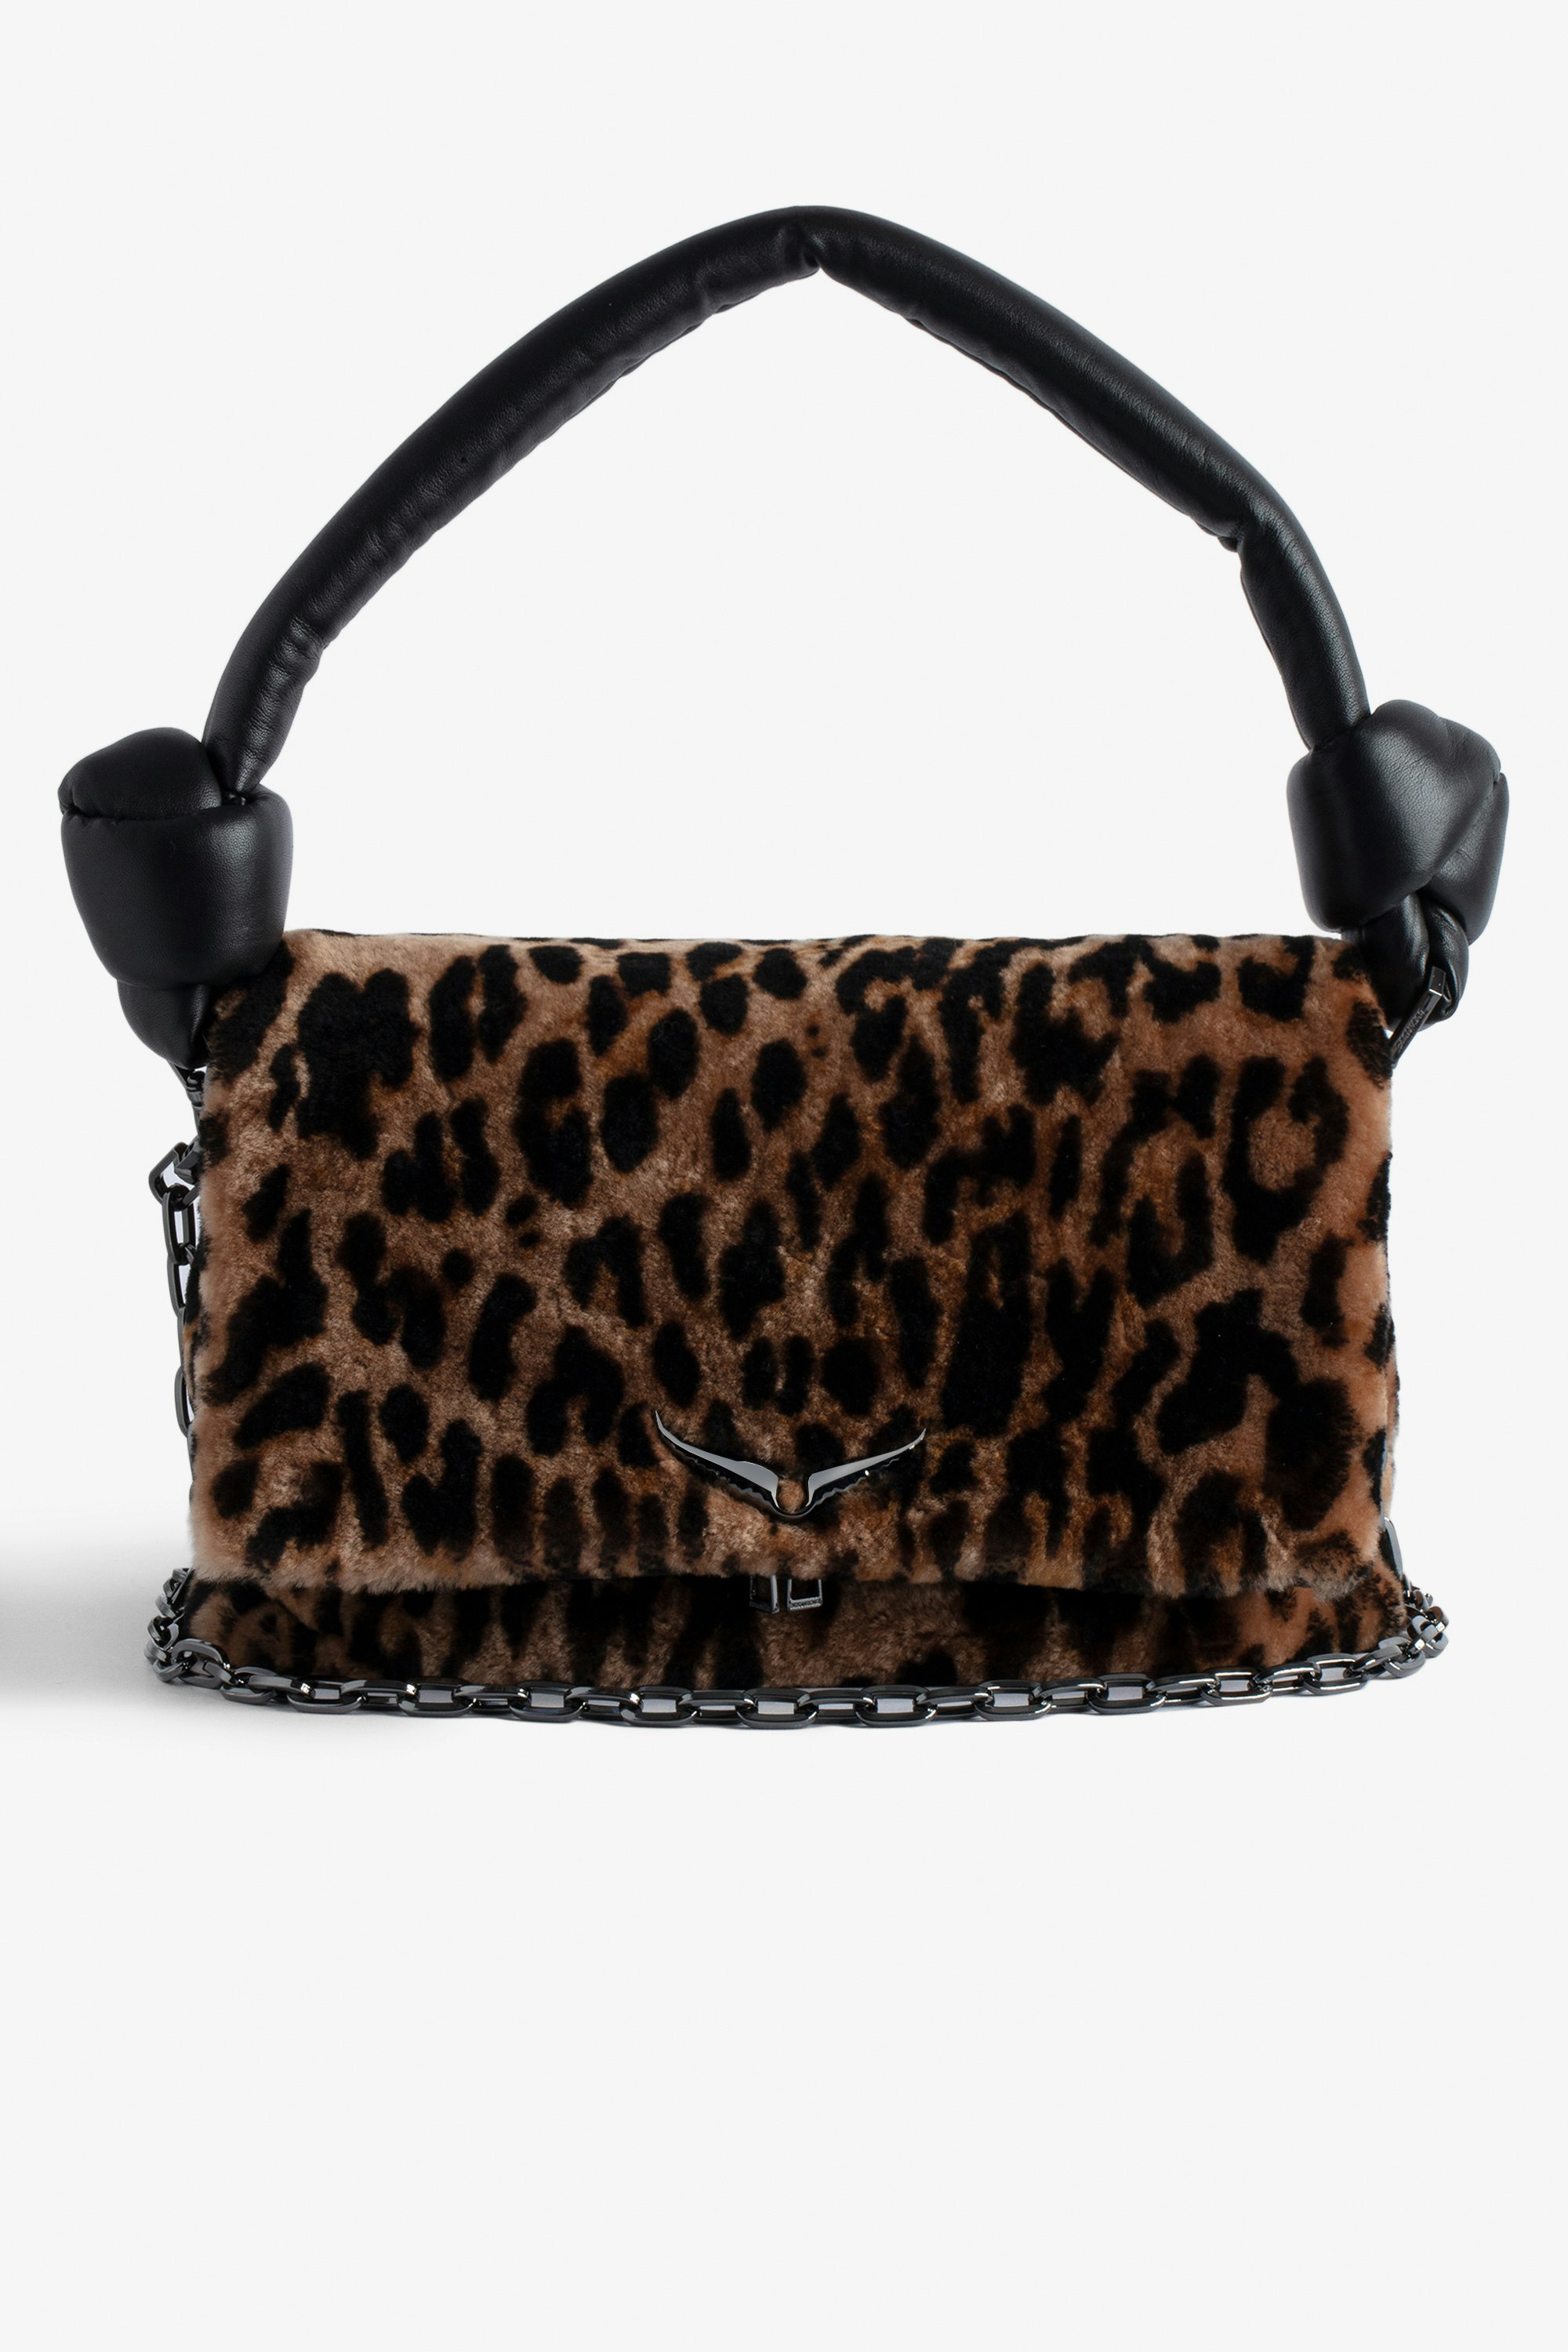 Rocky Eternal Leopard Bag Women’s brown leopard-print shearling bag with tied shoulder strap, chain and wings charm.